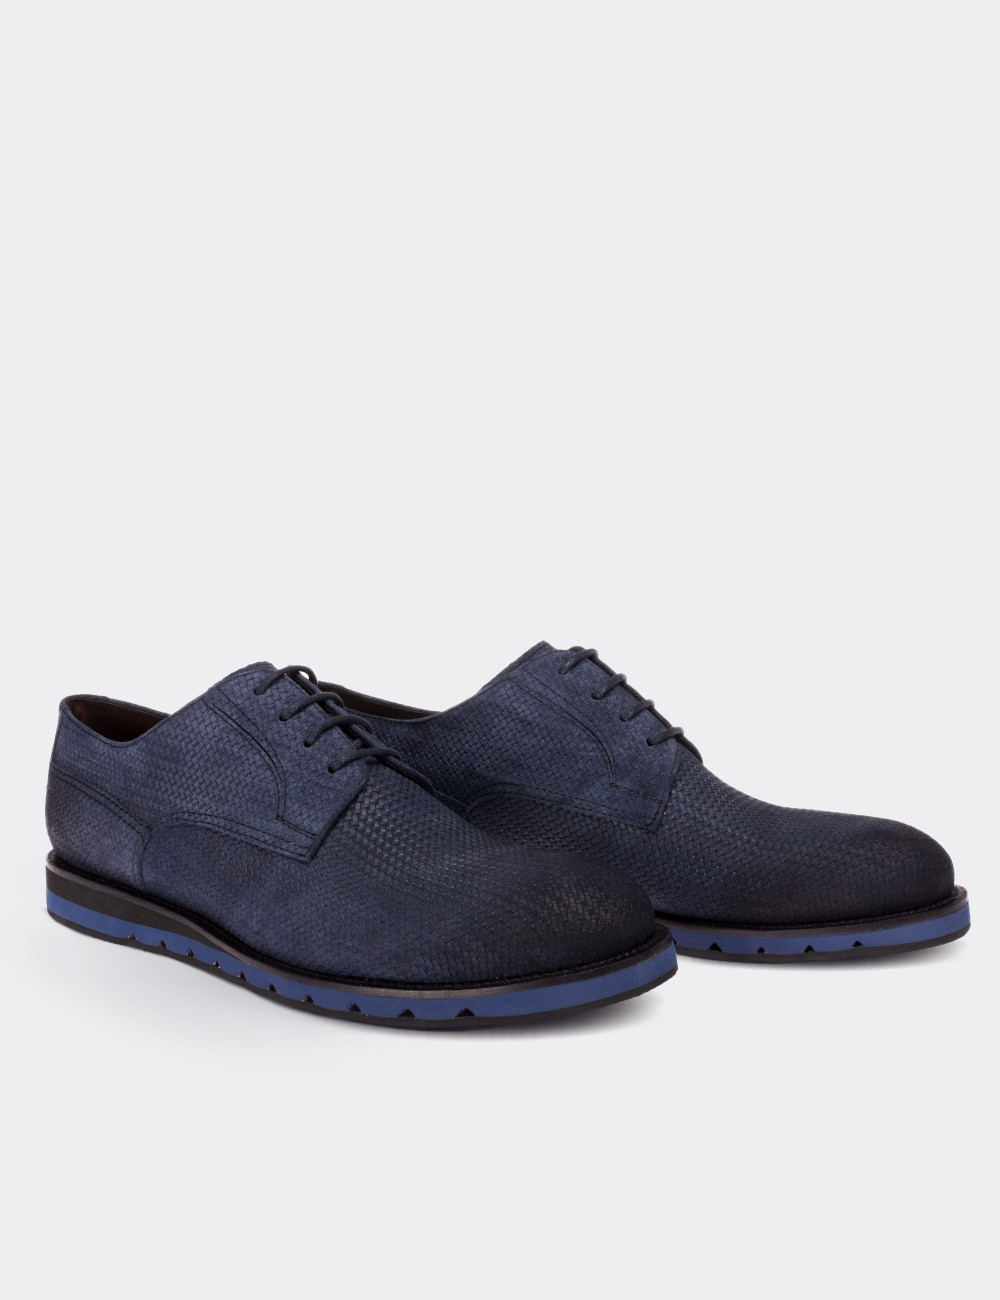 Navy Suede Leather Lace-up Shoes - 01294MLCVE16